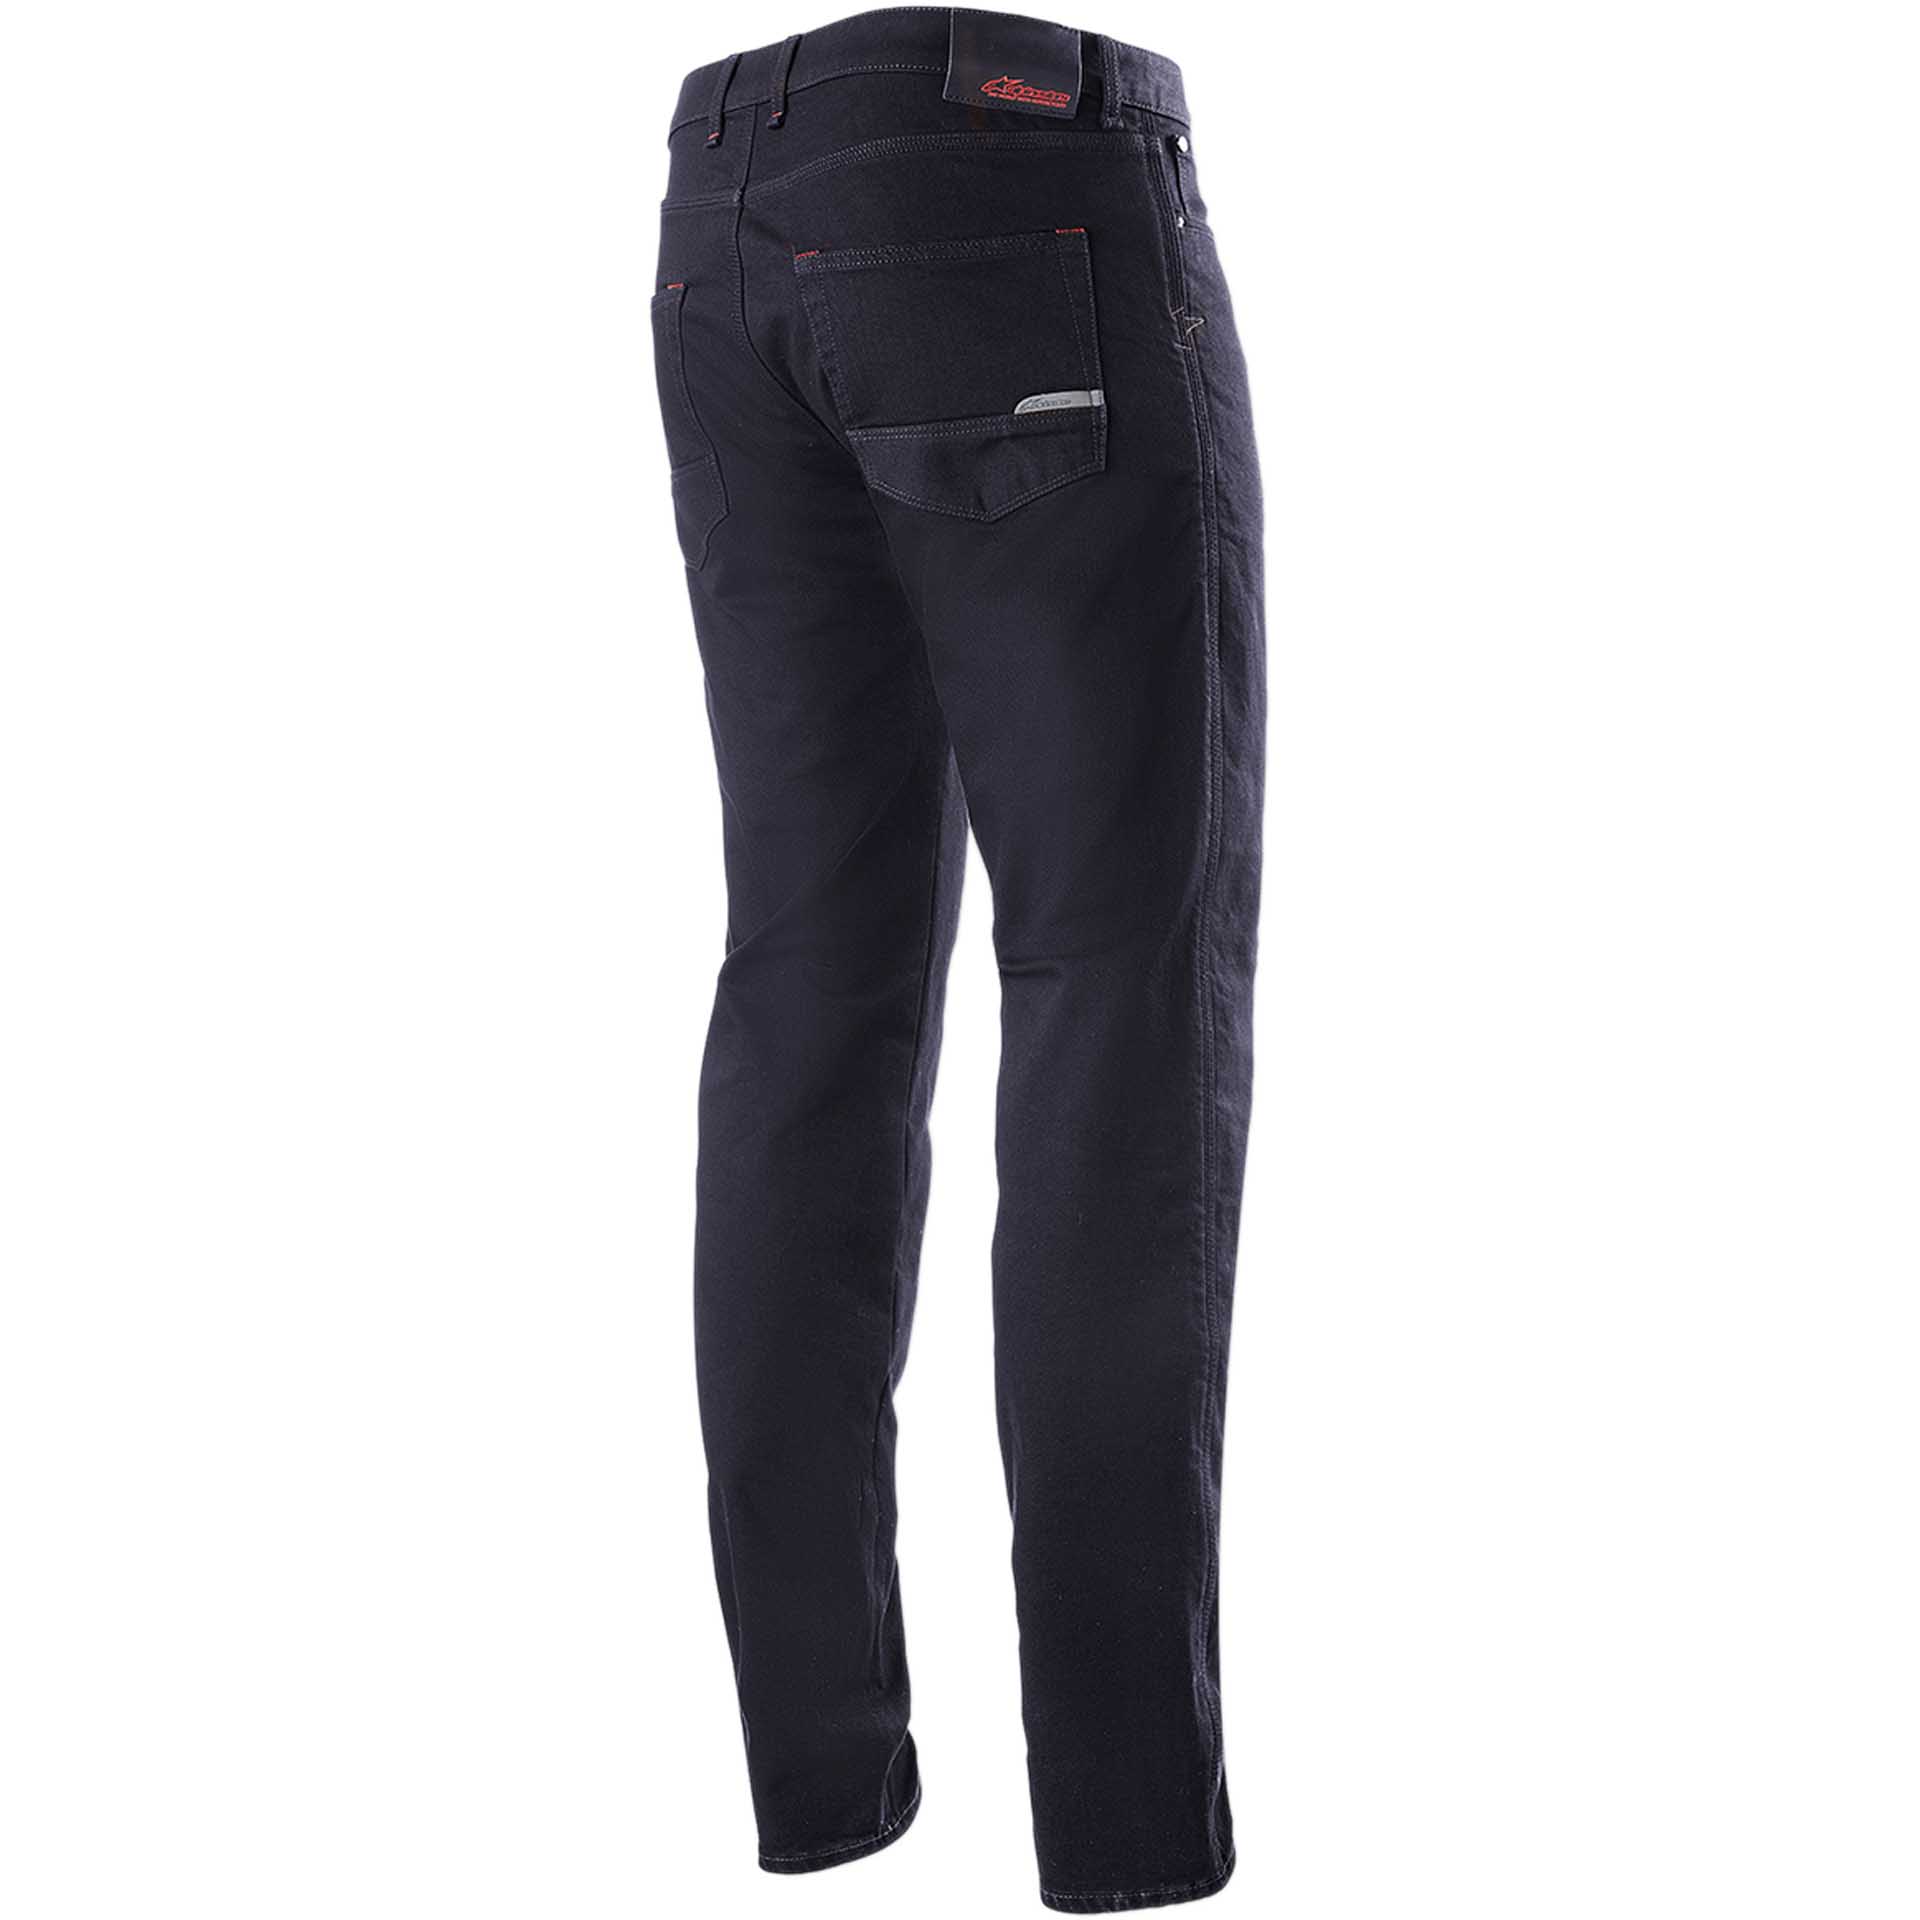 Solace Gear Gravel Motorcycle Denim Riding Jeans- 40 Pant Price in India -  Buy Solace Gear Gravel Motorcycle Denim Riding Jeans- 40 Pant online at  Flipkart.com